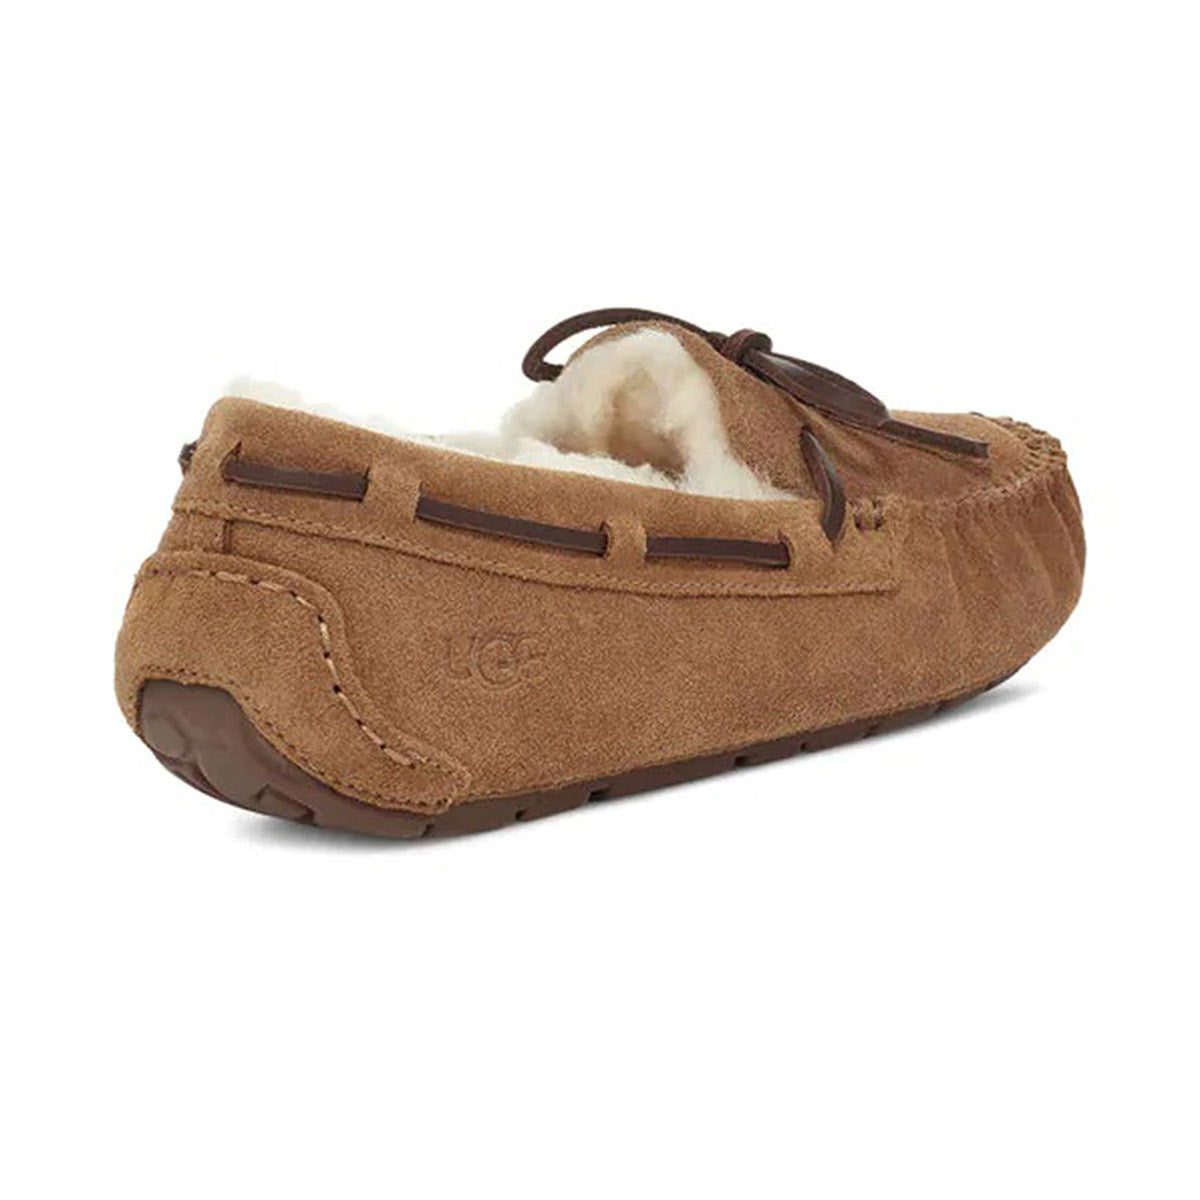 Brown suede Ugg Dakota Chestnut moccasin-inspired slipper with sheepskin lining and rubber sole.